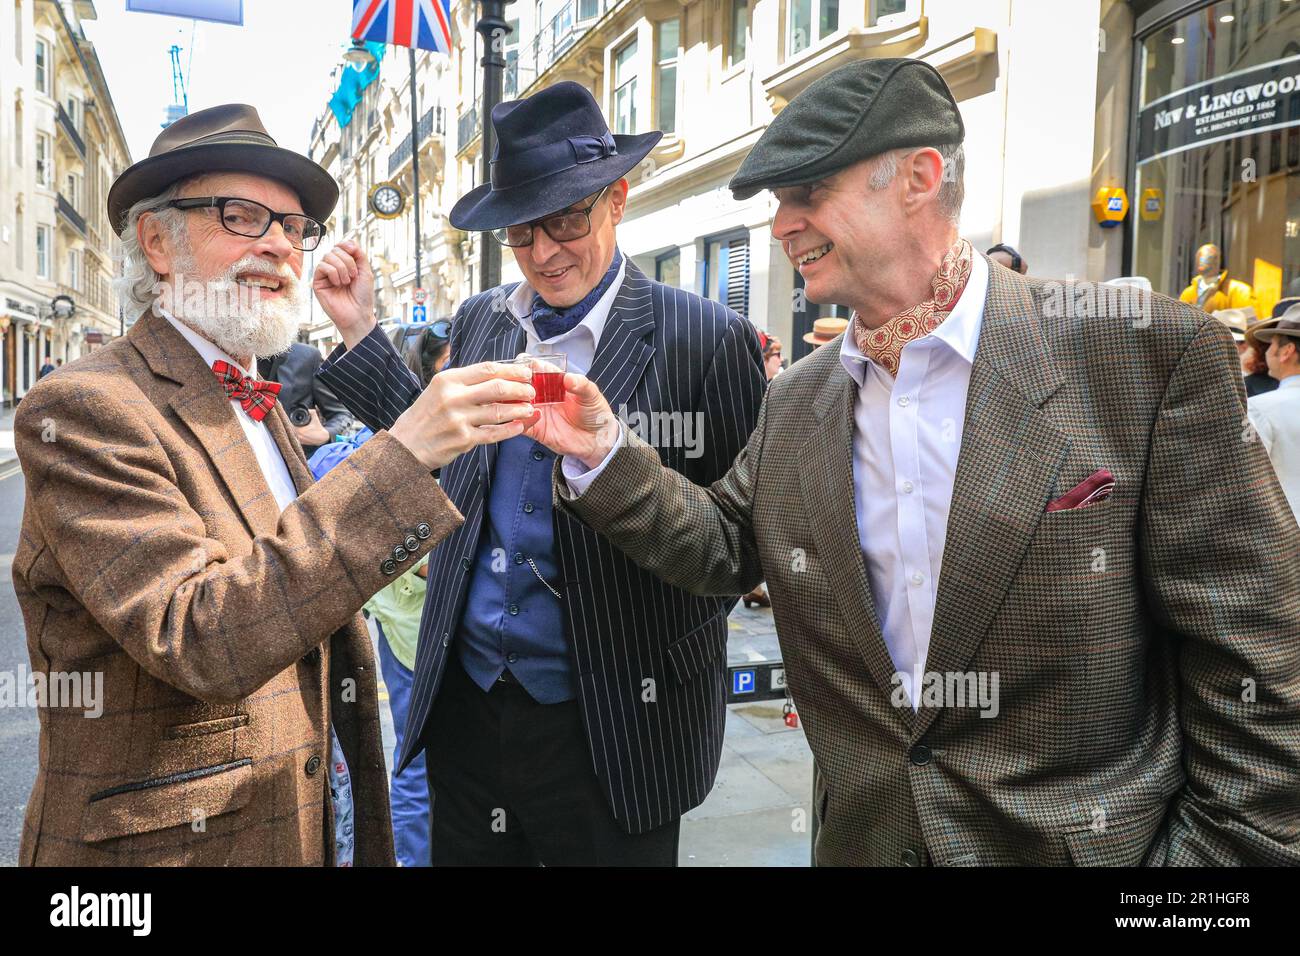 London, UK. 14th May, 2023. Three chaps toast in style kwith rhubarb gin. The annual Grand Flaneur Walk sees chaps and chapettes, dandies and quaintrelle in impeccable tailoring and style flanning and sauntering without purpose around St James' and surrounding areas of London. The walk always starts at the statue of socialite dandy Beau Brummell and slowly makes its way around the area. Credit: Imageplotter/Alamy Live News Stock Photo